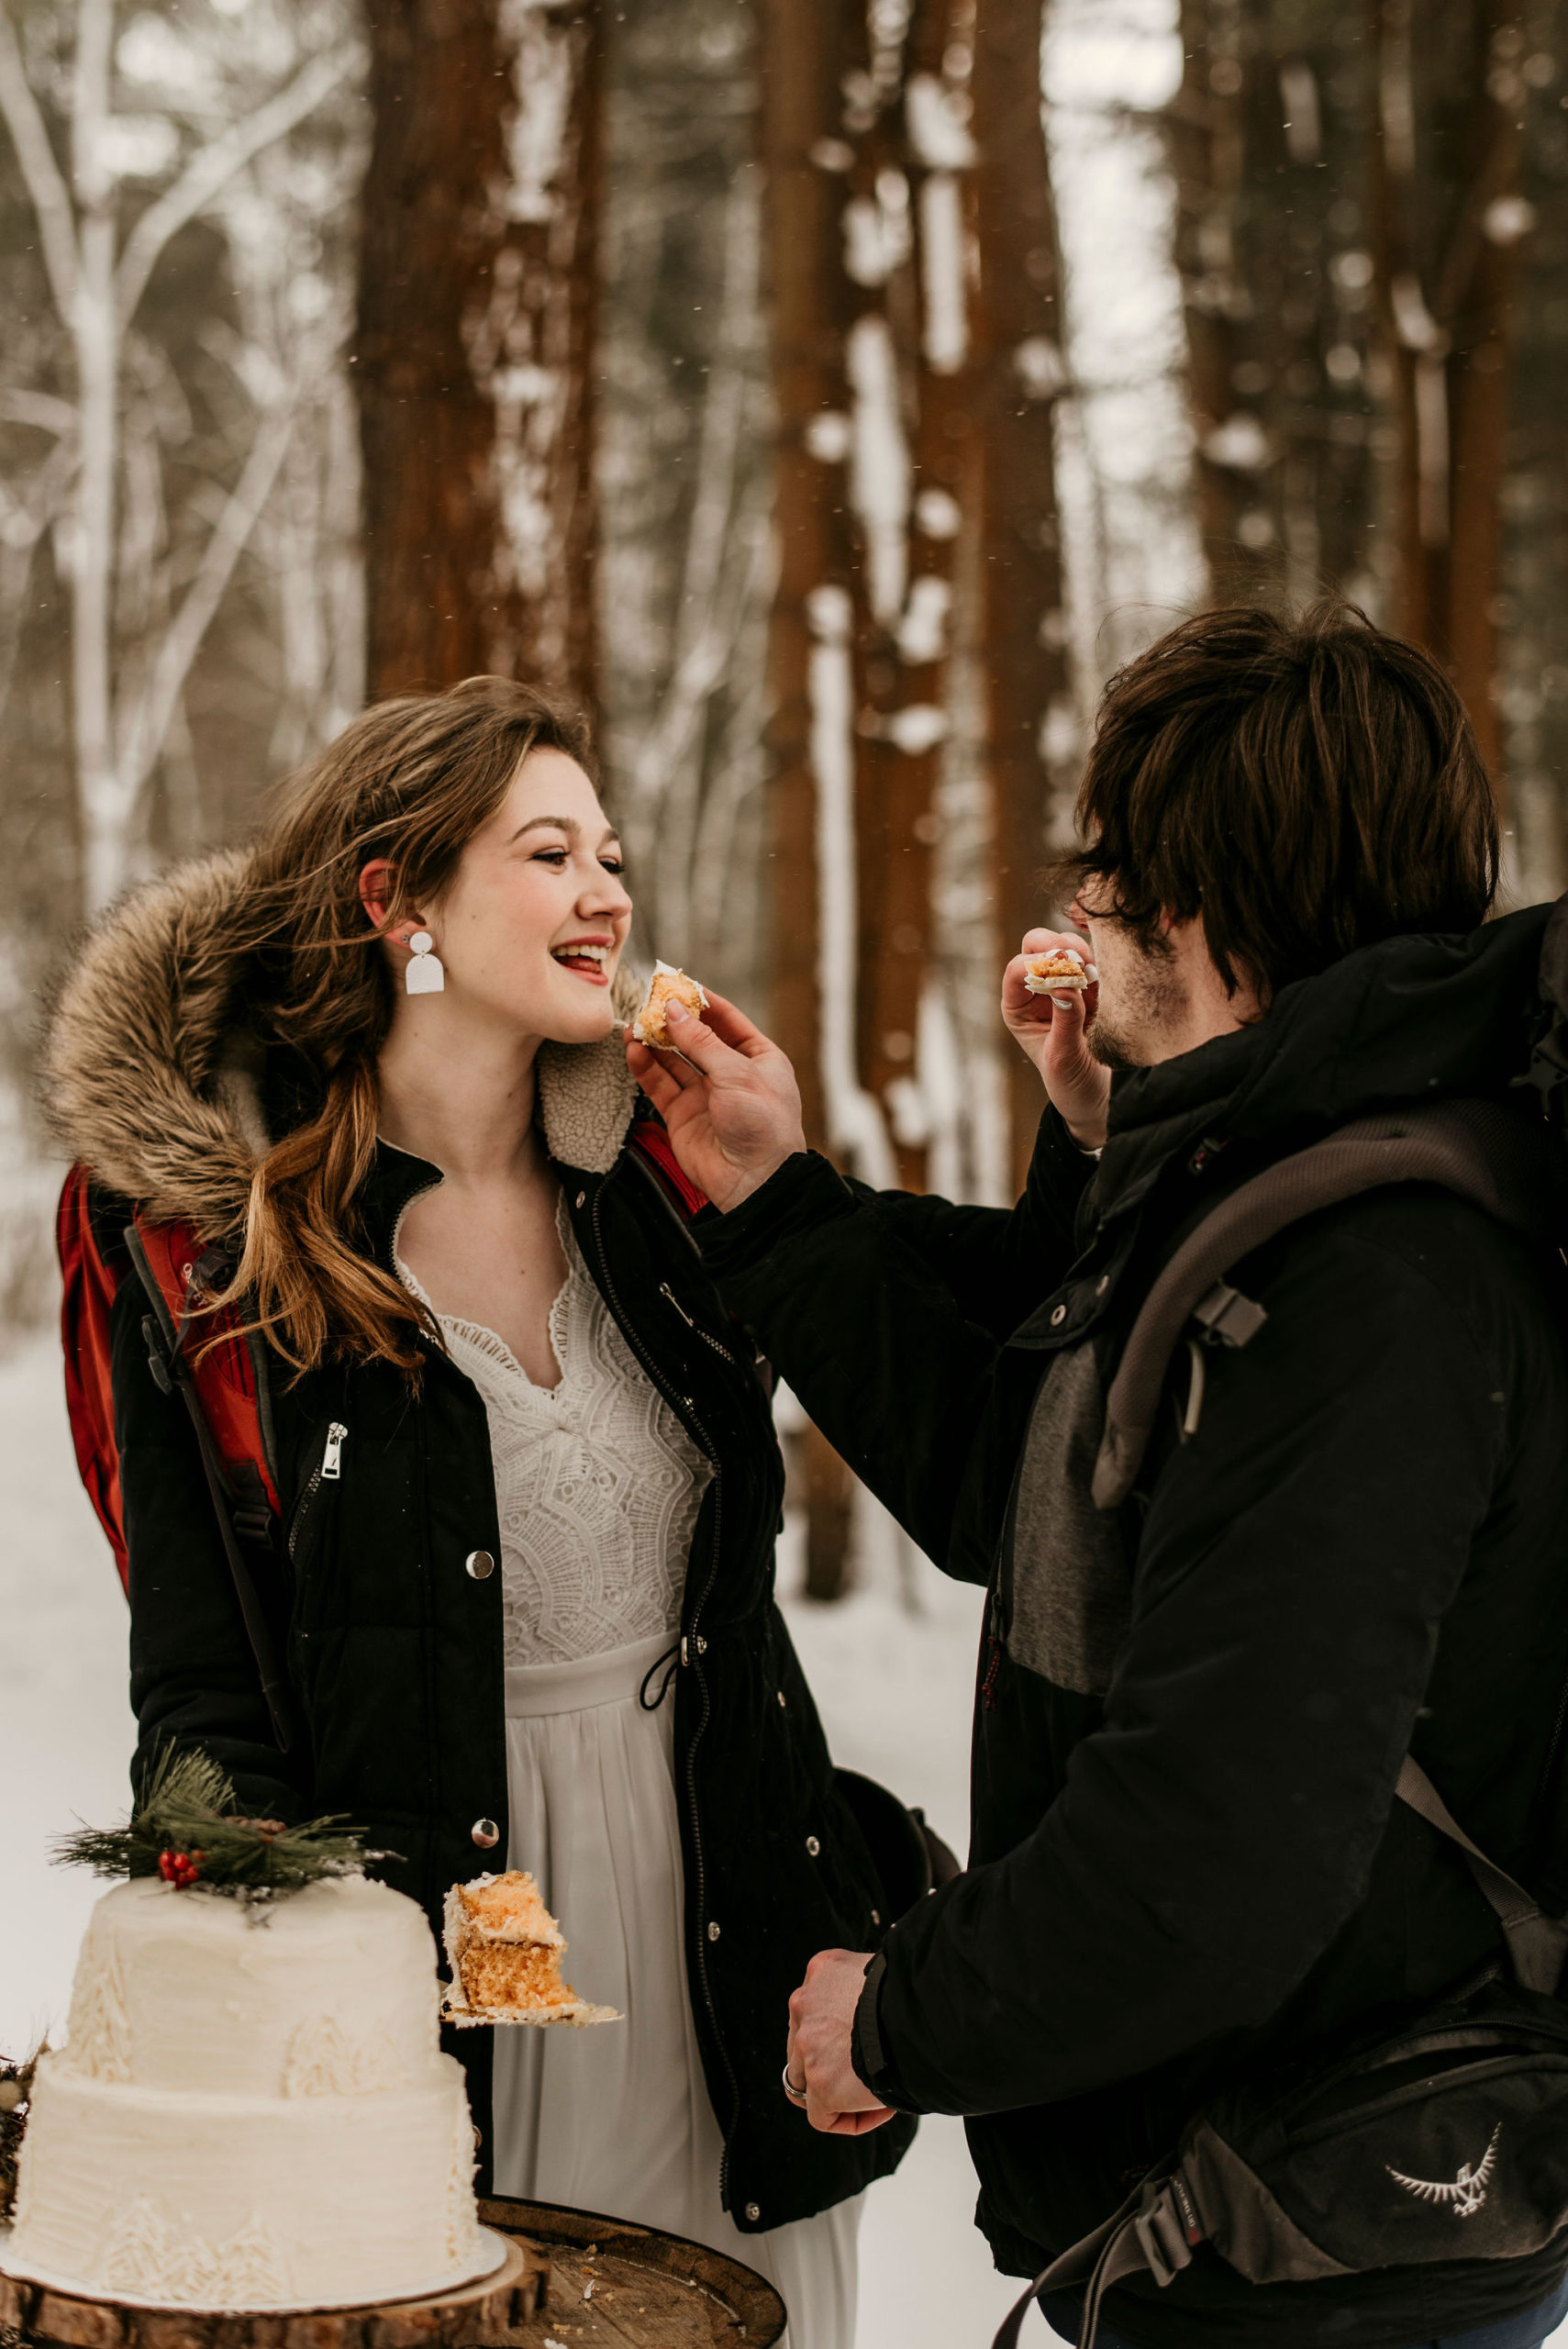 bride and groom feeding eachother cake in a snowy forest